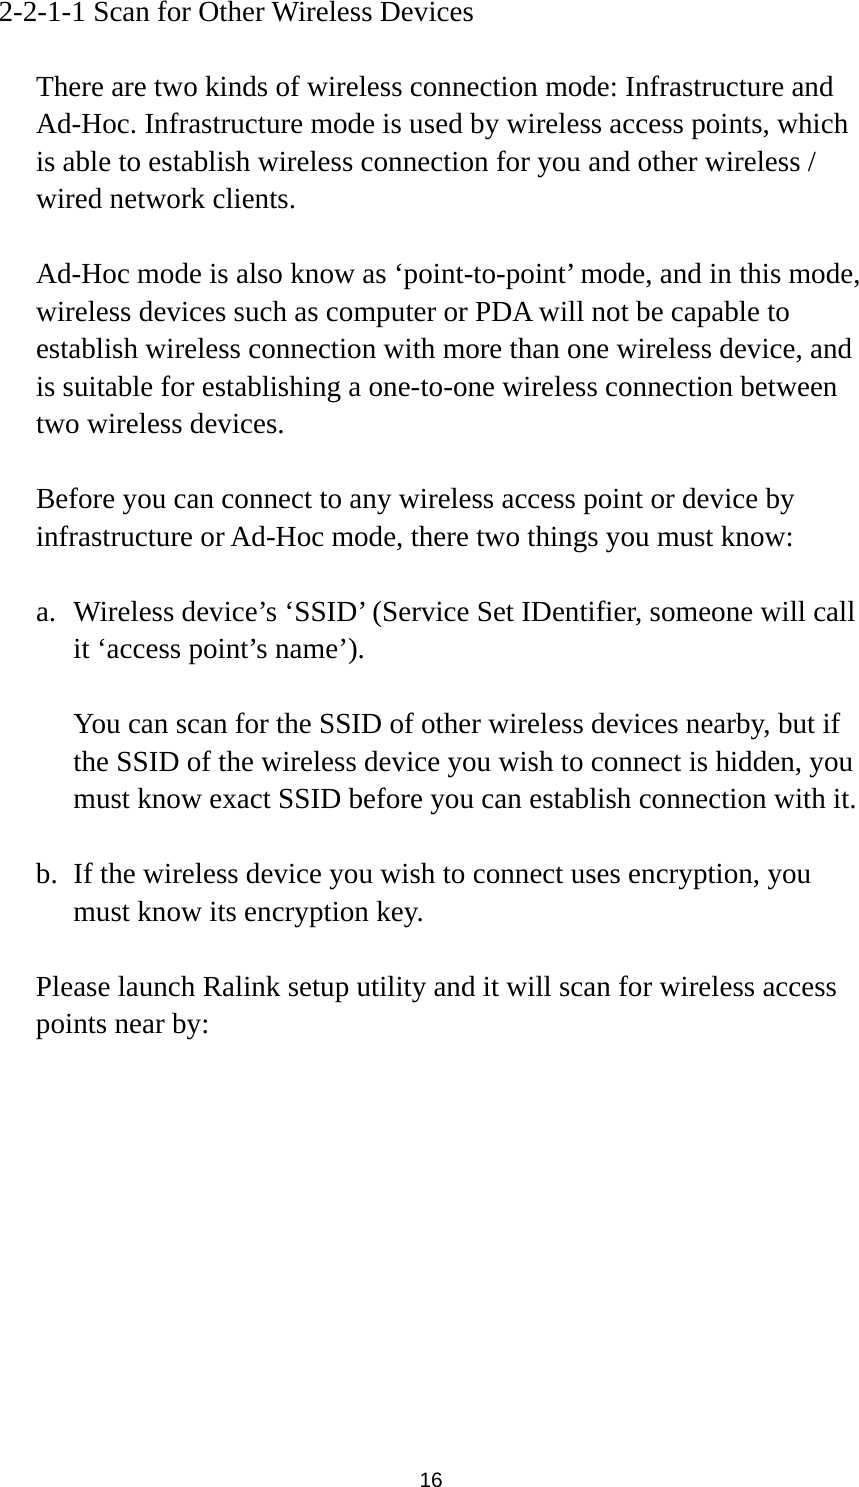  16 2-2-1-1 Scan for Other Wireless Devices  There are two kinds of wireless connection mode: Infrastructure and Ad-Hoc. Infrastructure mode is used by wireless access points, which is able to establish wireless connection for you and other wireless / wired network clients.    Ad-Hoc mode is also know as ‘point-to-point’ mode, and in this mode, wireless devices such as computer or PDA will not be capable to establish wireless connection with more than one wireless device, and is suitable for establishing a one-to-one wireless connection between two wireless devices.  Before you can connect to any wireless access point or device by infrastructure or Ad-Hoc mode, there two things you must know:  a. Wireless device’s ‘SSID’ (Service Set IDentifier, someone will call it ‘access point’s name’).    You can scan for the SSID of other wireless devices nearby, but if the SSID of the wireless device you wish to connect is hidden, you must know exact SSID before you can establish connection with it.  b. If the wireless device you wish to connect uses encryption, you must know its encryption key.    Please launch Ralink setup utility and it will scan for wireless access points near by:  